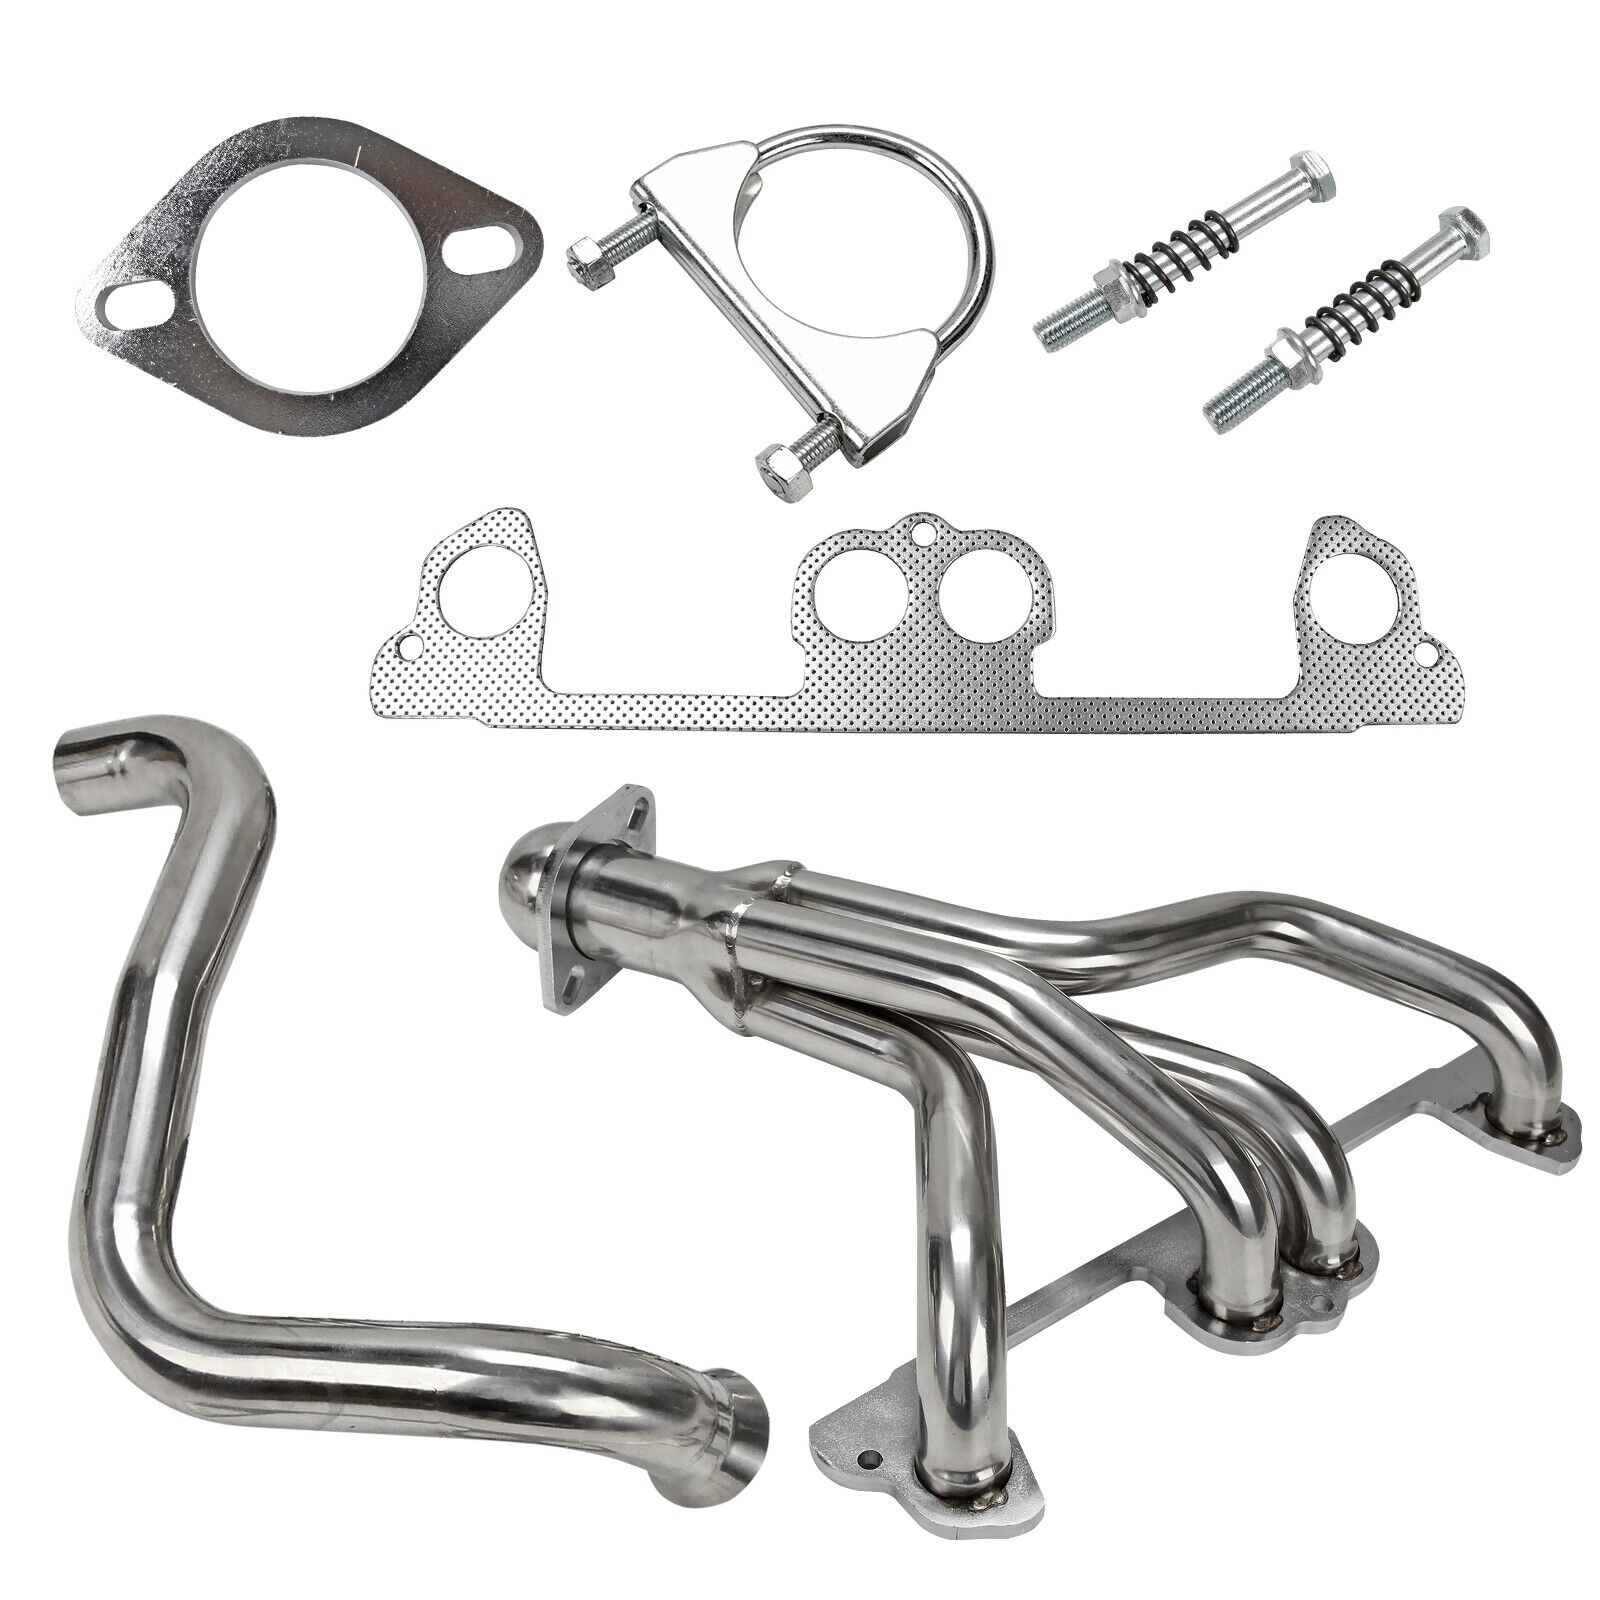 Stainless Manifold Exhaust Header+ Pipe Fit For Jeep Wrangler TJ 1997-99 2.5L L4